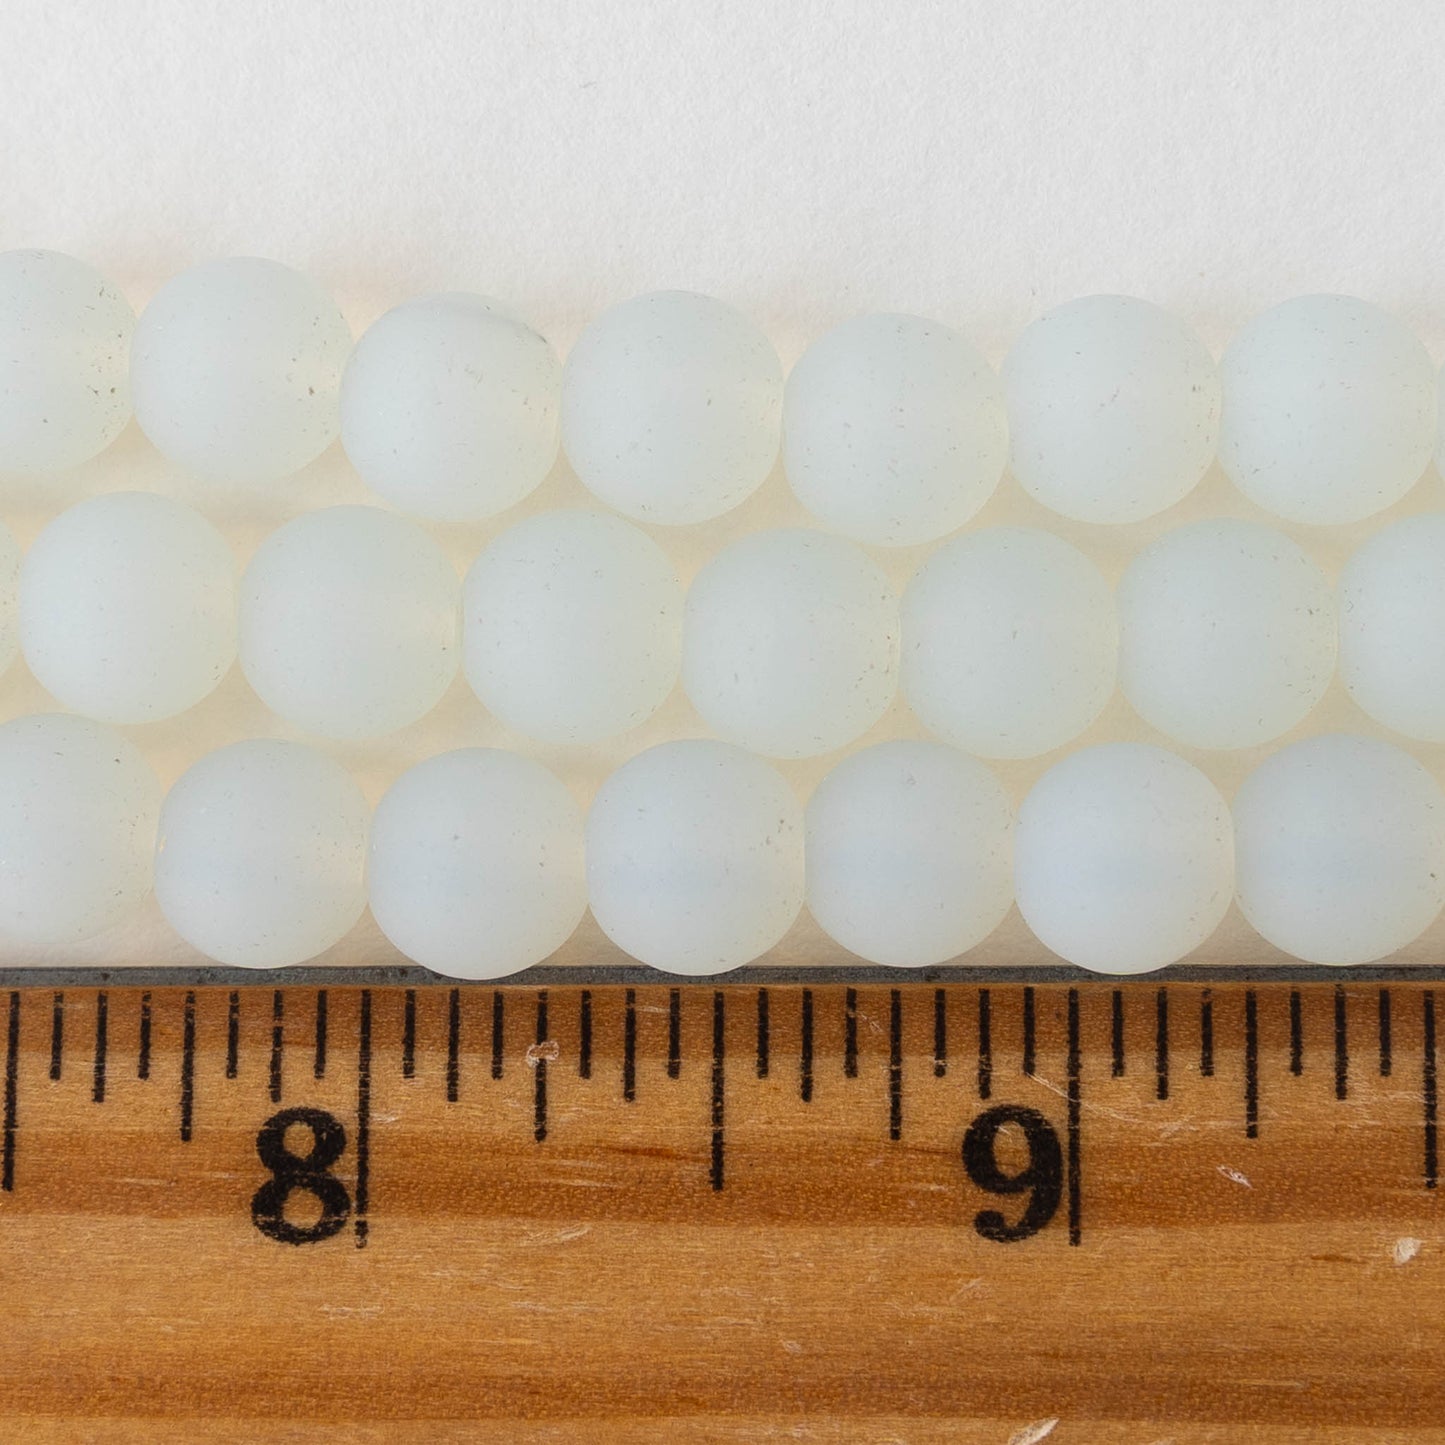 8mm Frosted Glass Rounds - Moonstone Glass - 16 Inches